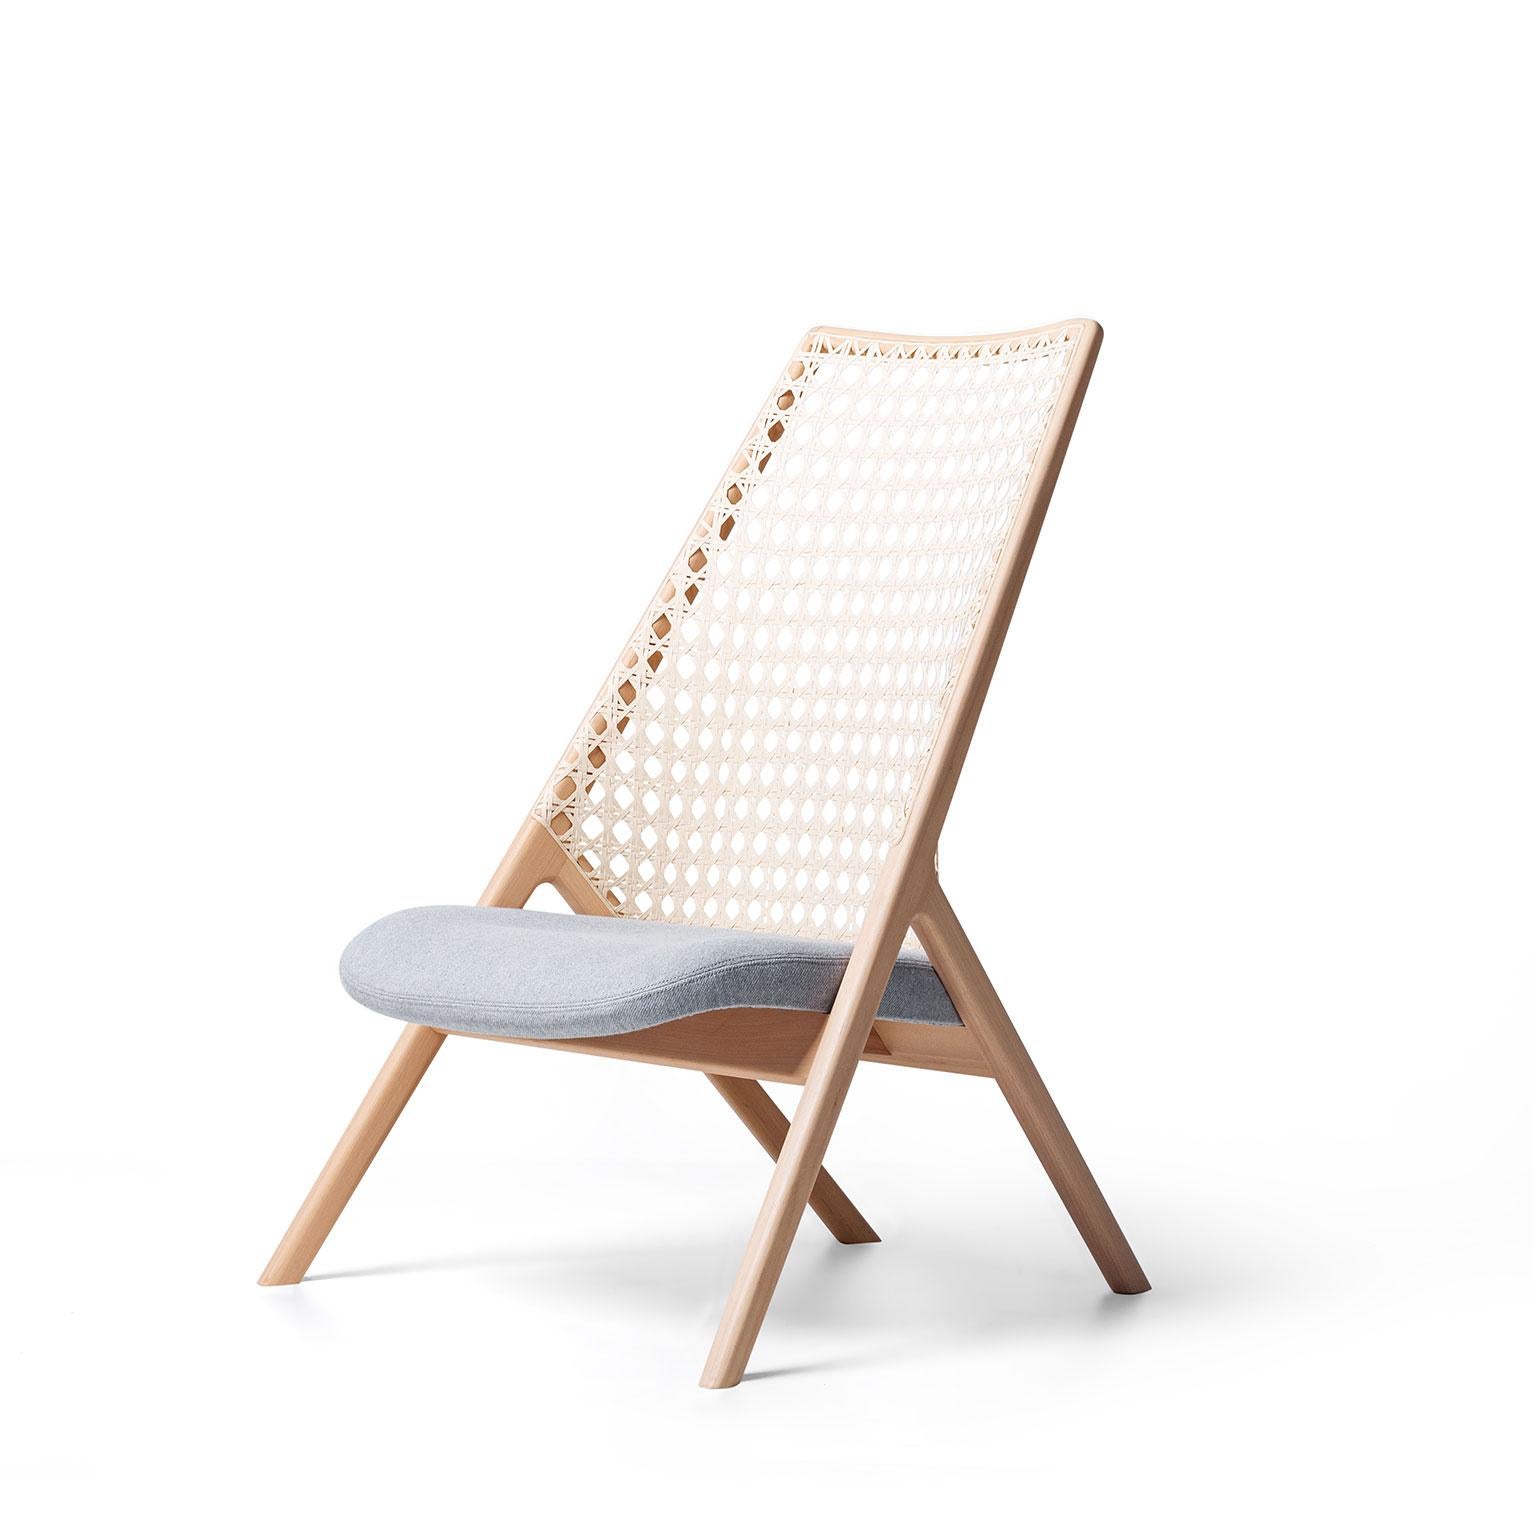 Hand-Woven Tela Lounge Chair in Recycled Cotton, by Wentz, Brazilian Contemporary Design For Sale